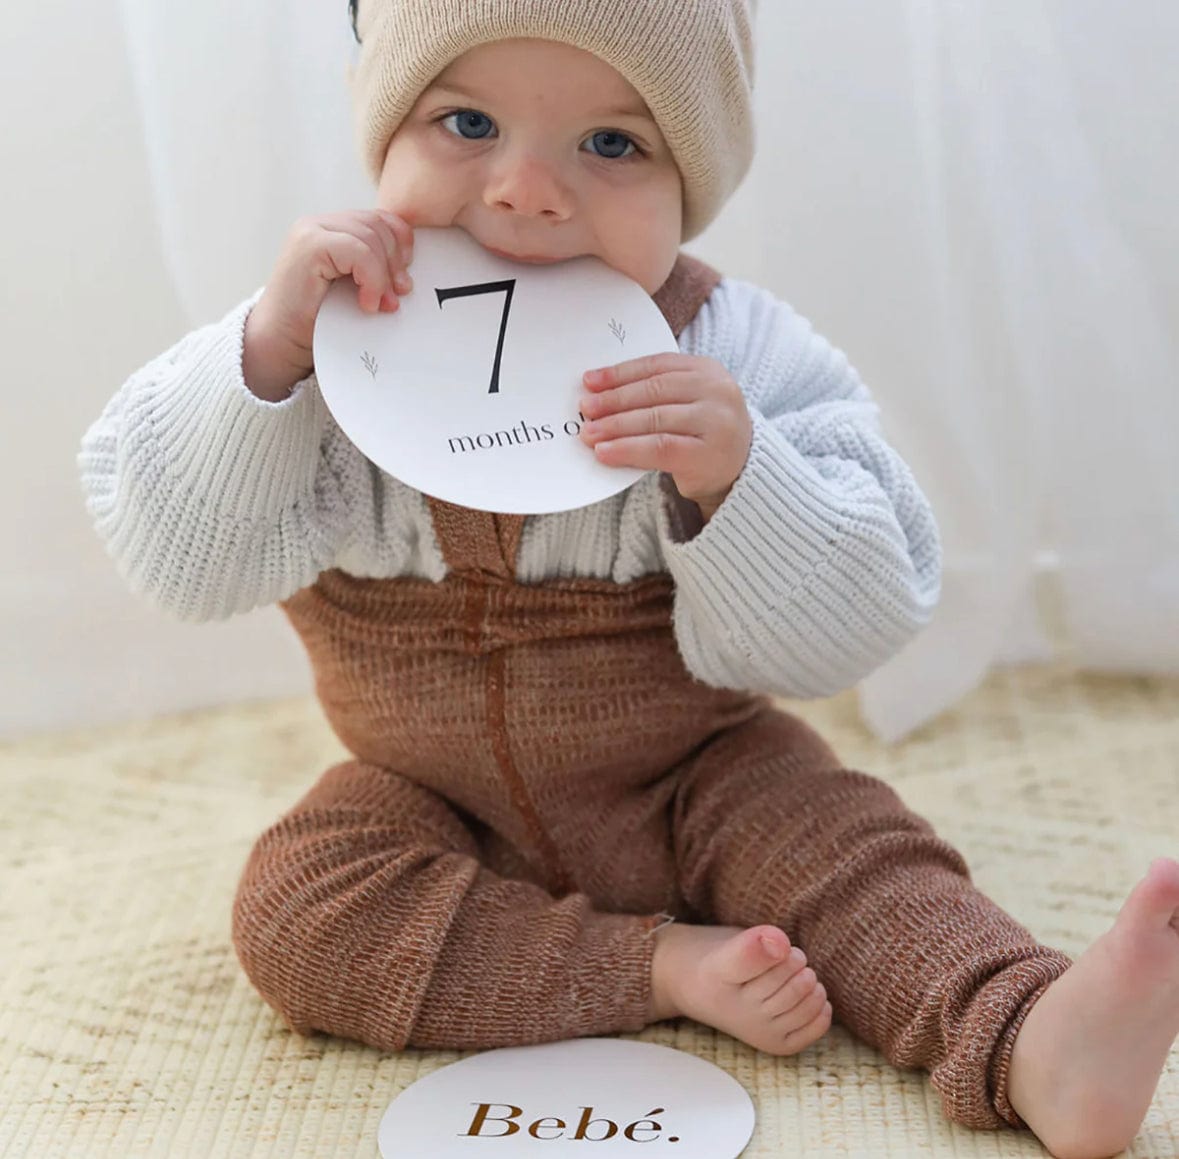 Baby Milestone Cards by Truly Amor